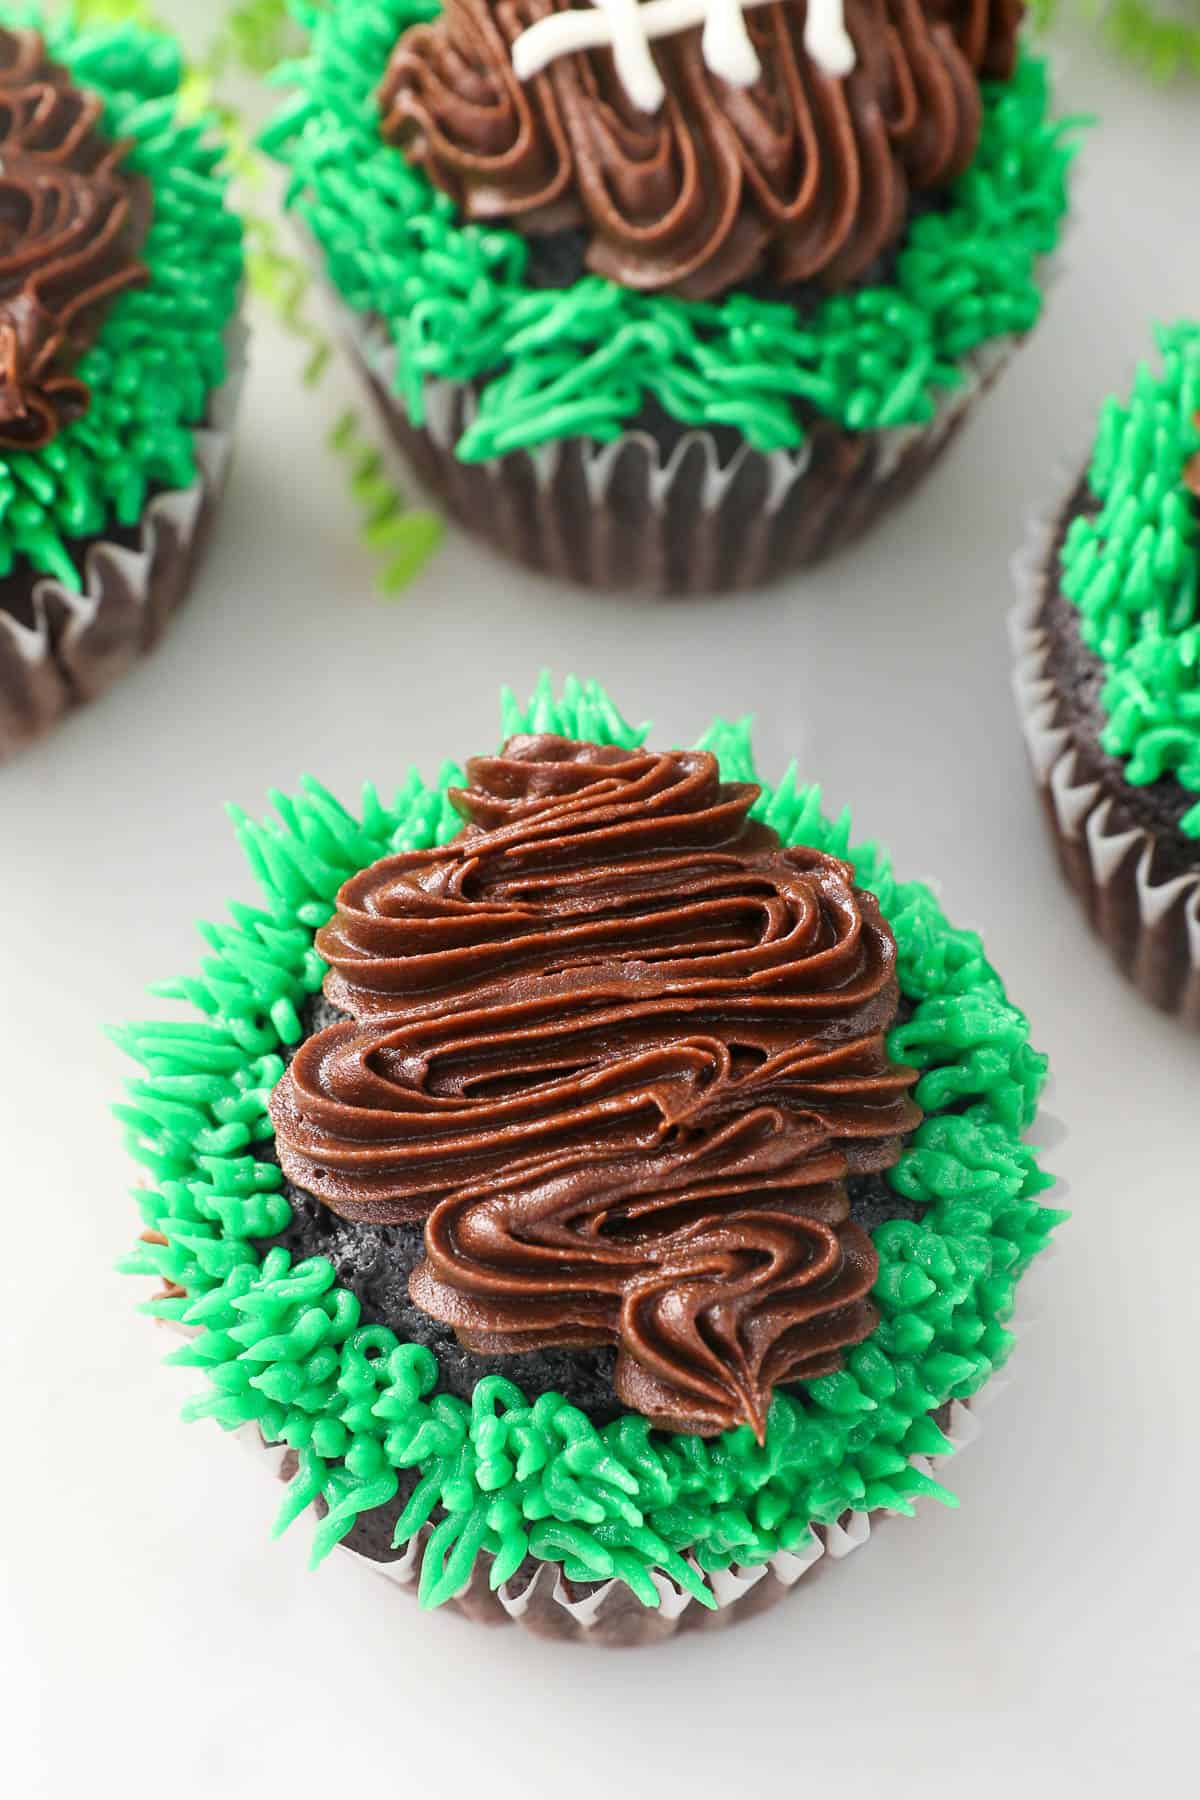 Brown frosting piped over a chocolate cupcake to form the shape of a football, surrounded by green piped frosting grass.